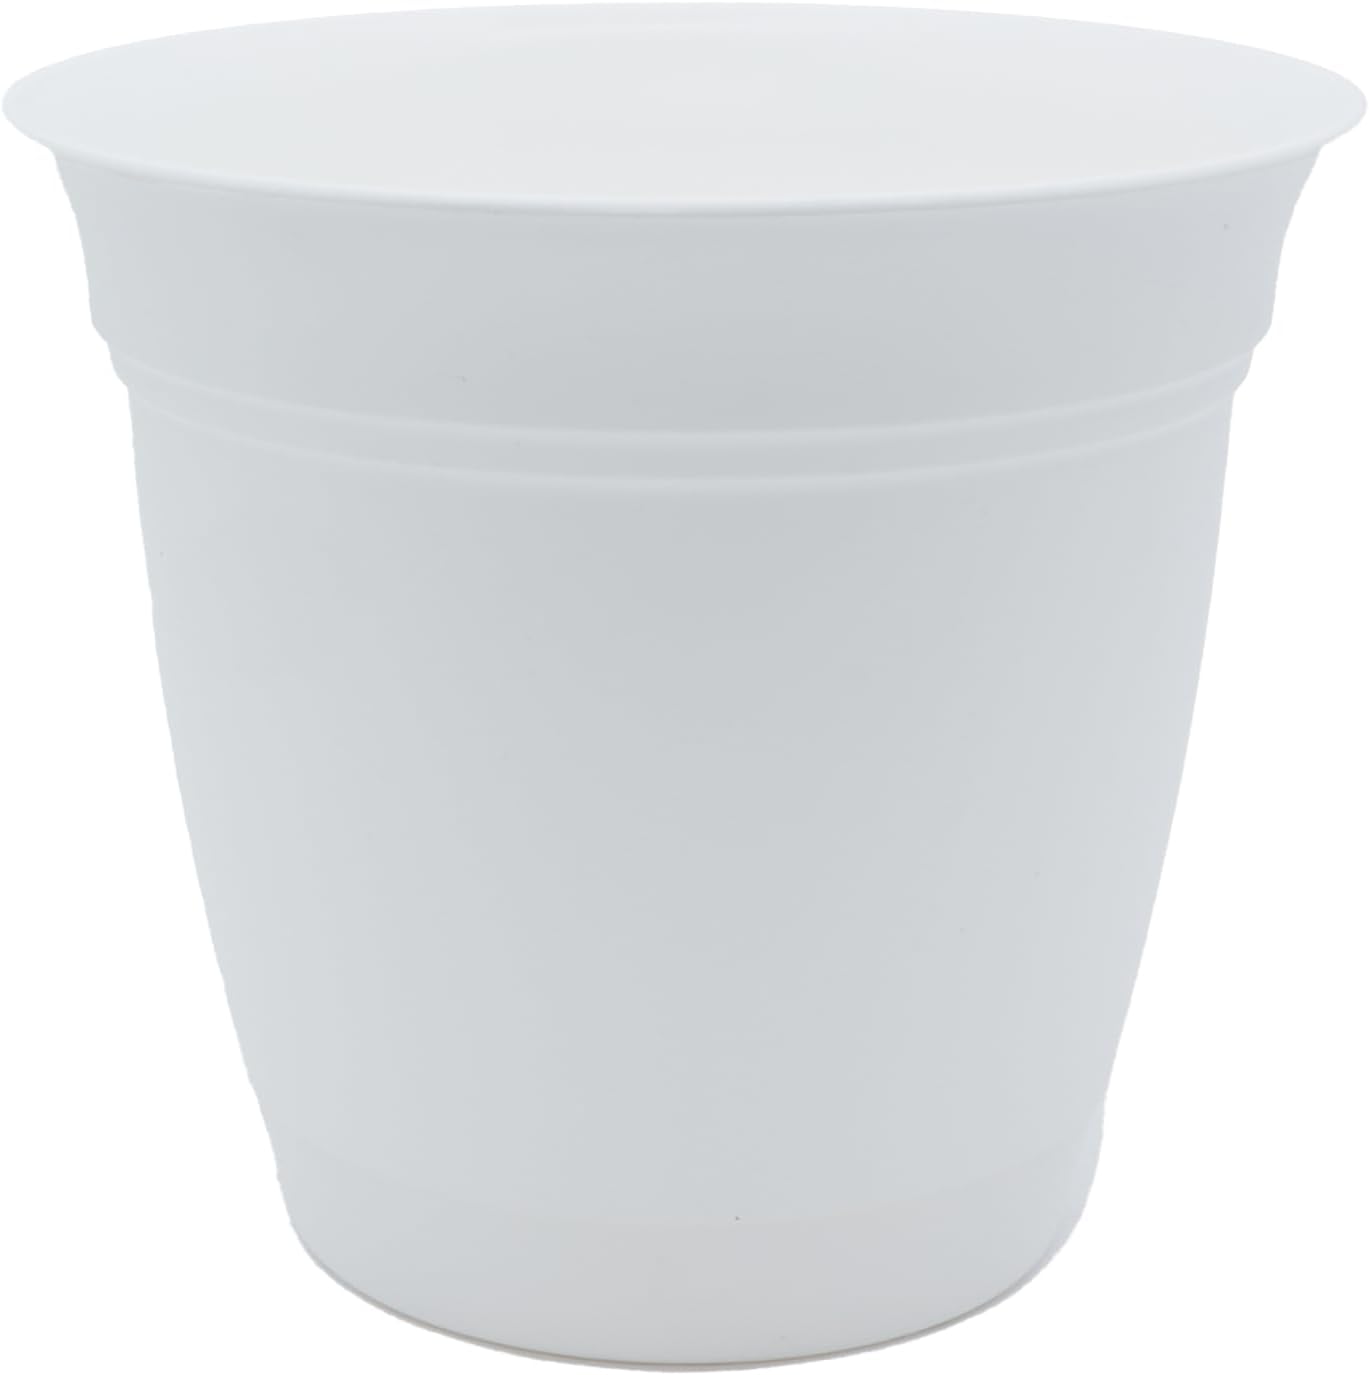 The HC Companies 8 Inch Eclipse Plant Pot - Indoor Outdoor Round Classic Planter with Attached Saucer for Flowers, Vegetables, and Herbs, White